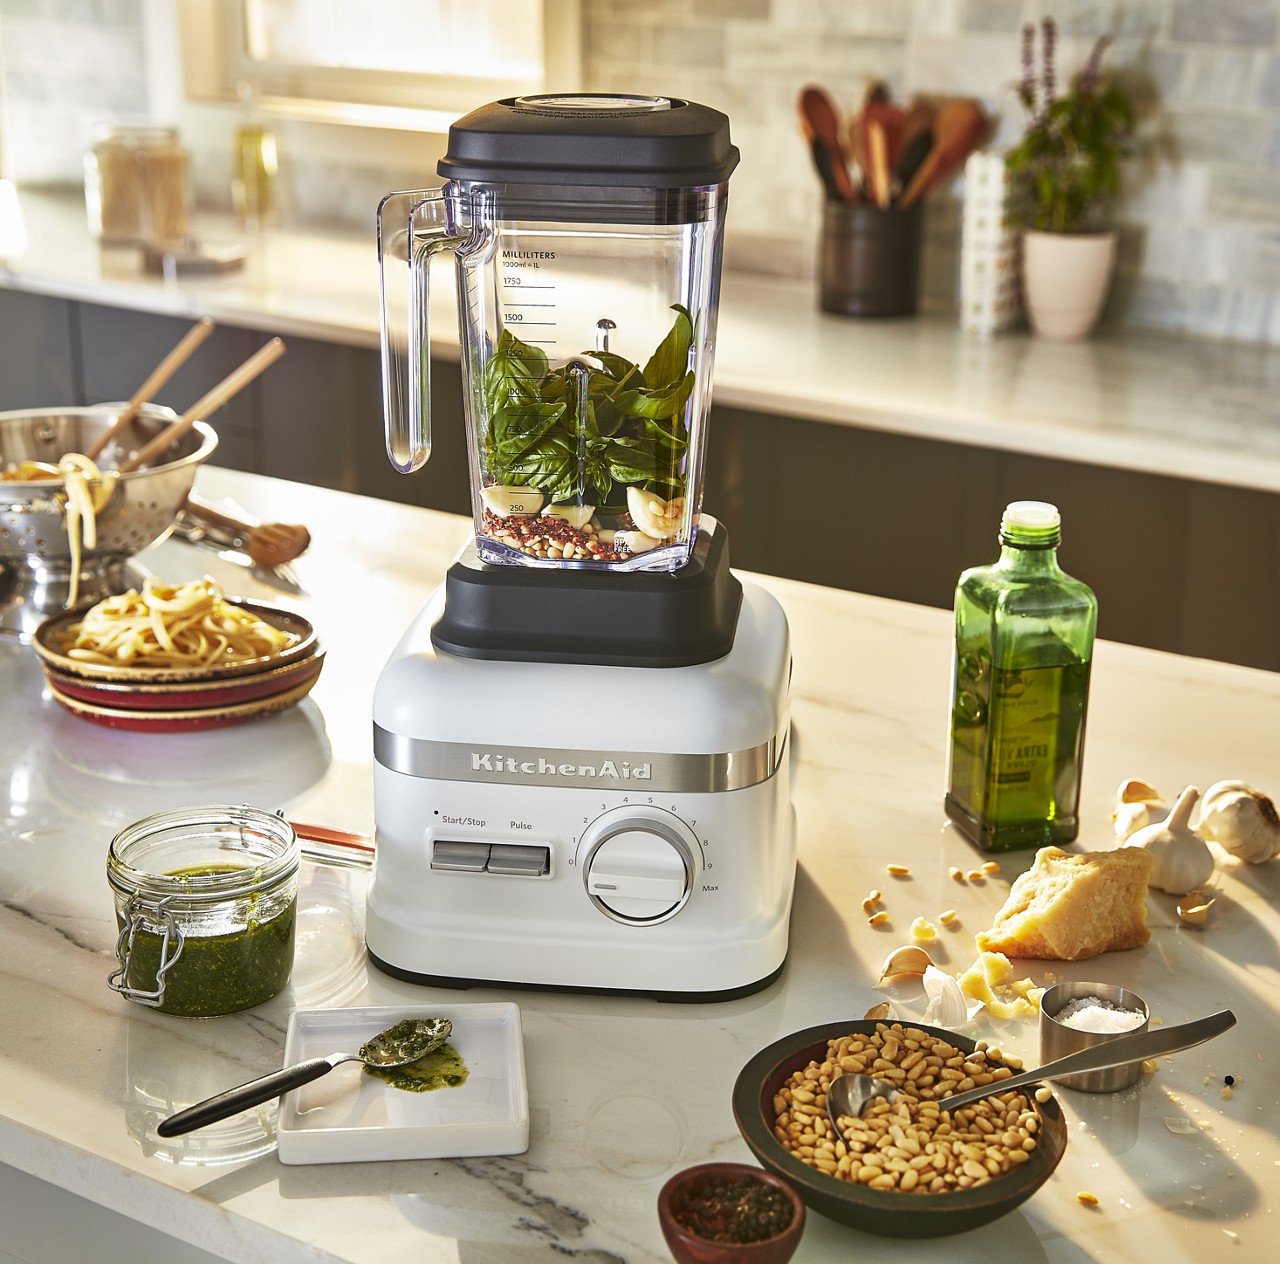 Find stylish and powerful blender models from KitchenAid. 